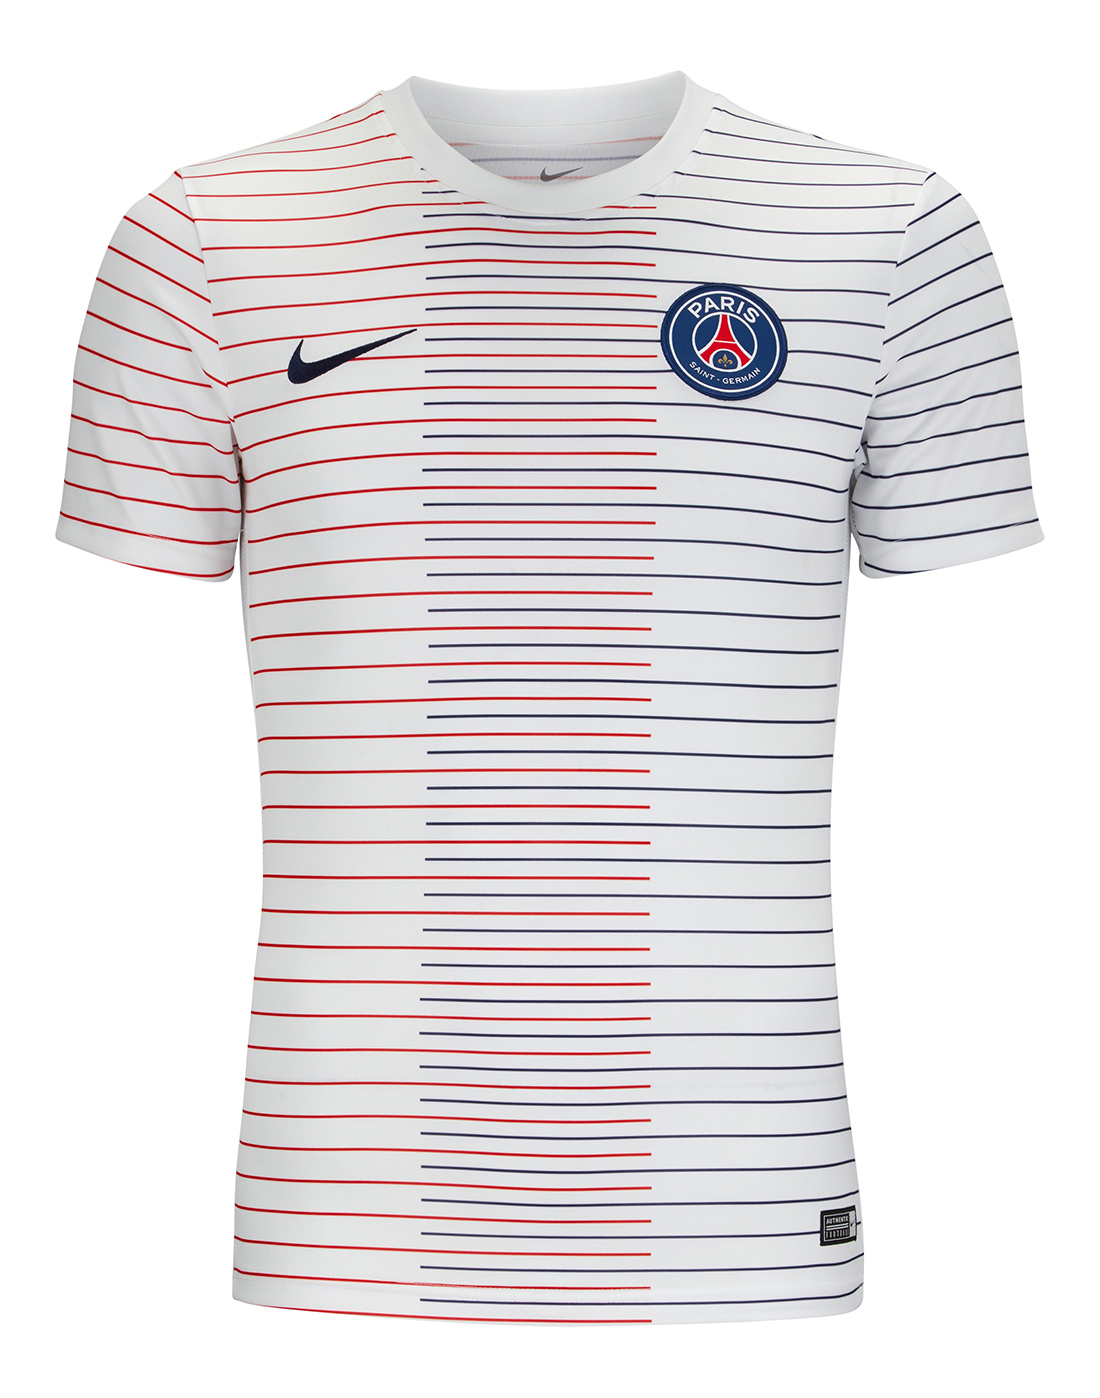 Psg Pre Game Jersey : 19-20 PSG Authentic Fourth Jersey (Player Version) - To prepare for this ...